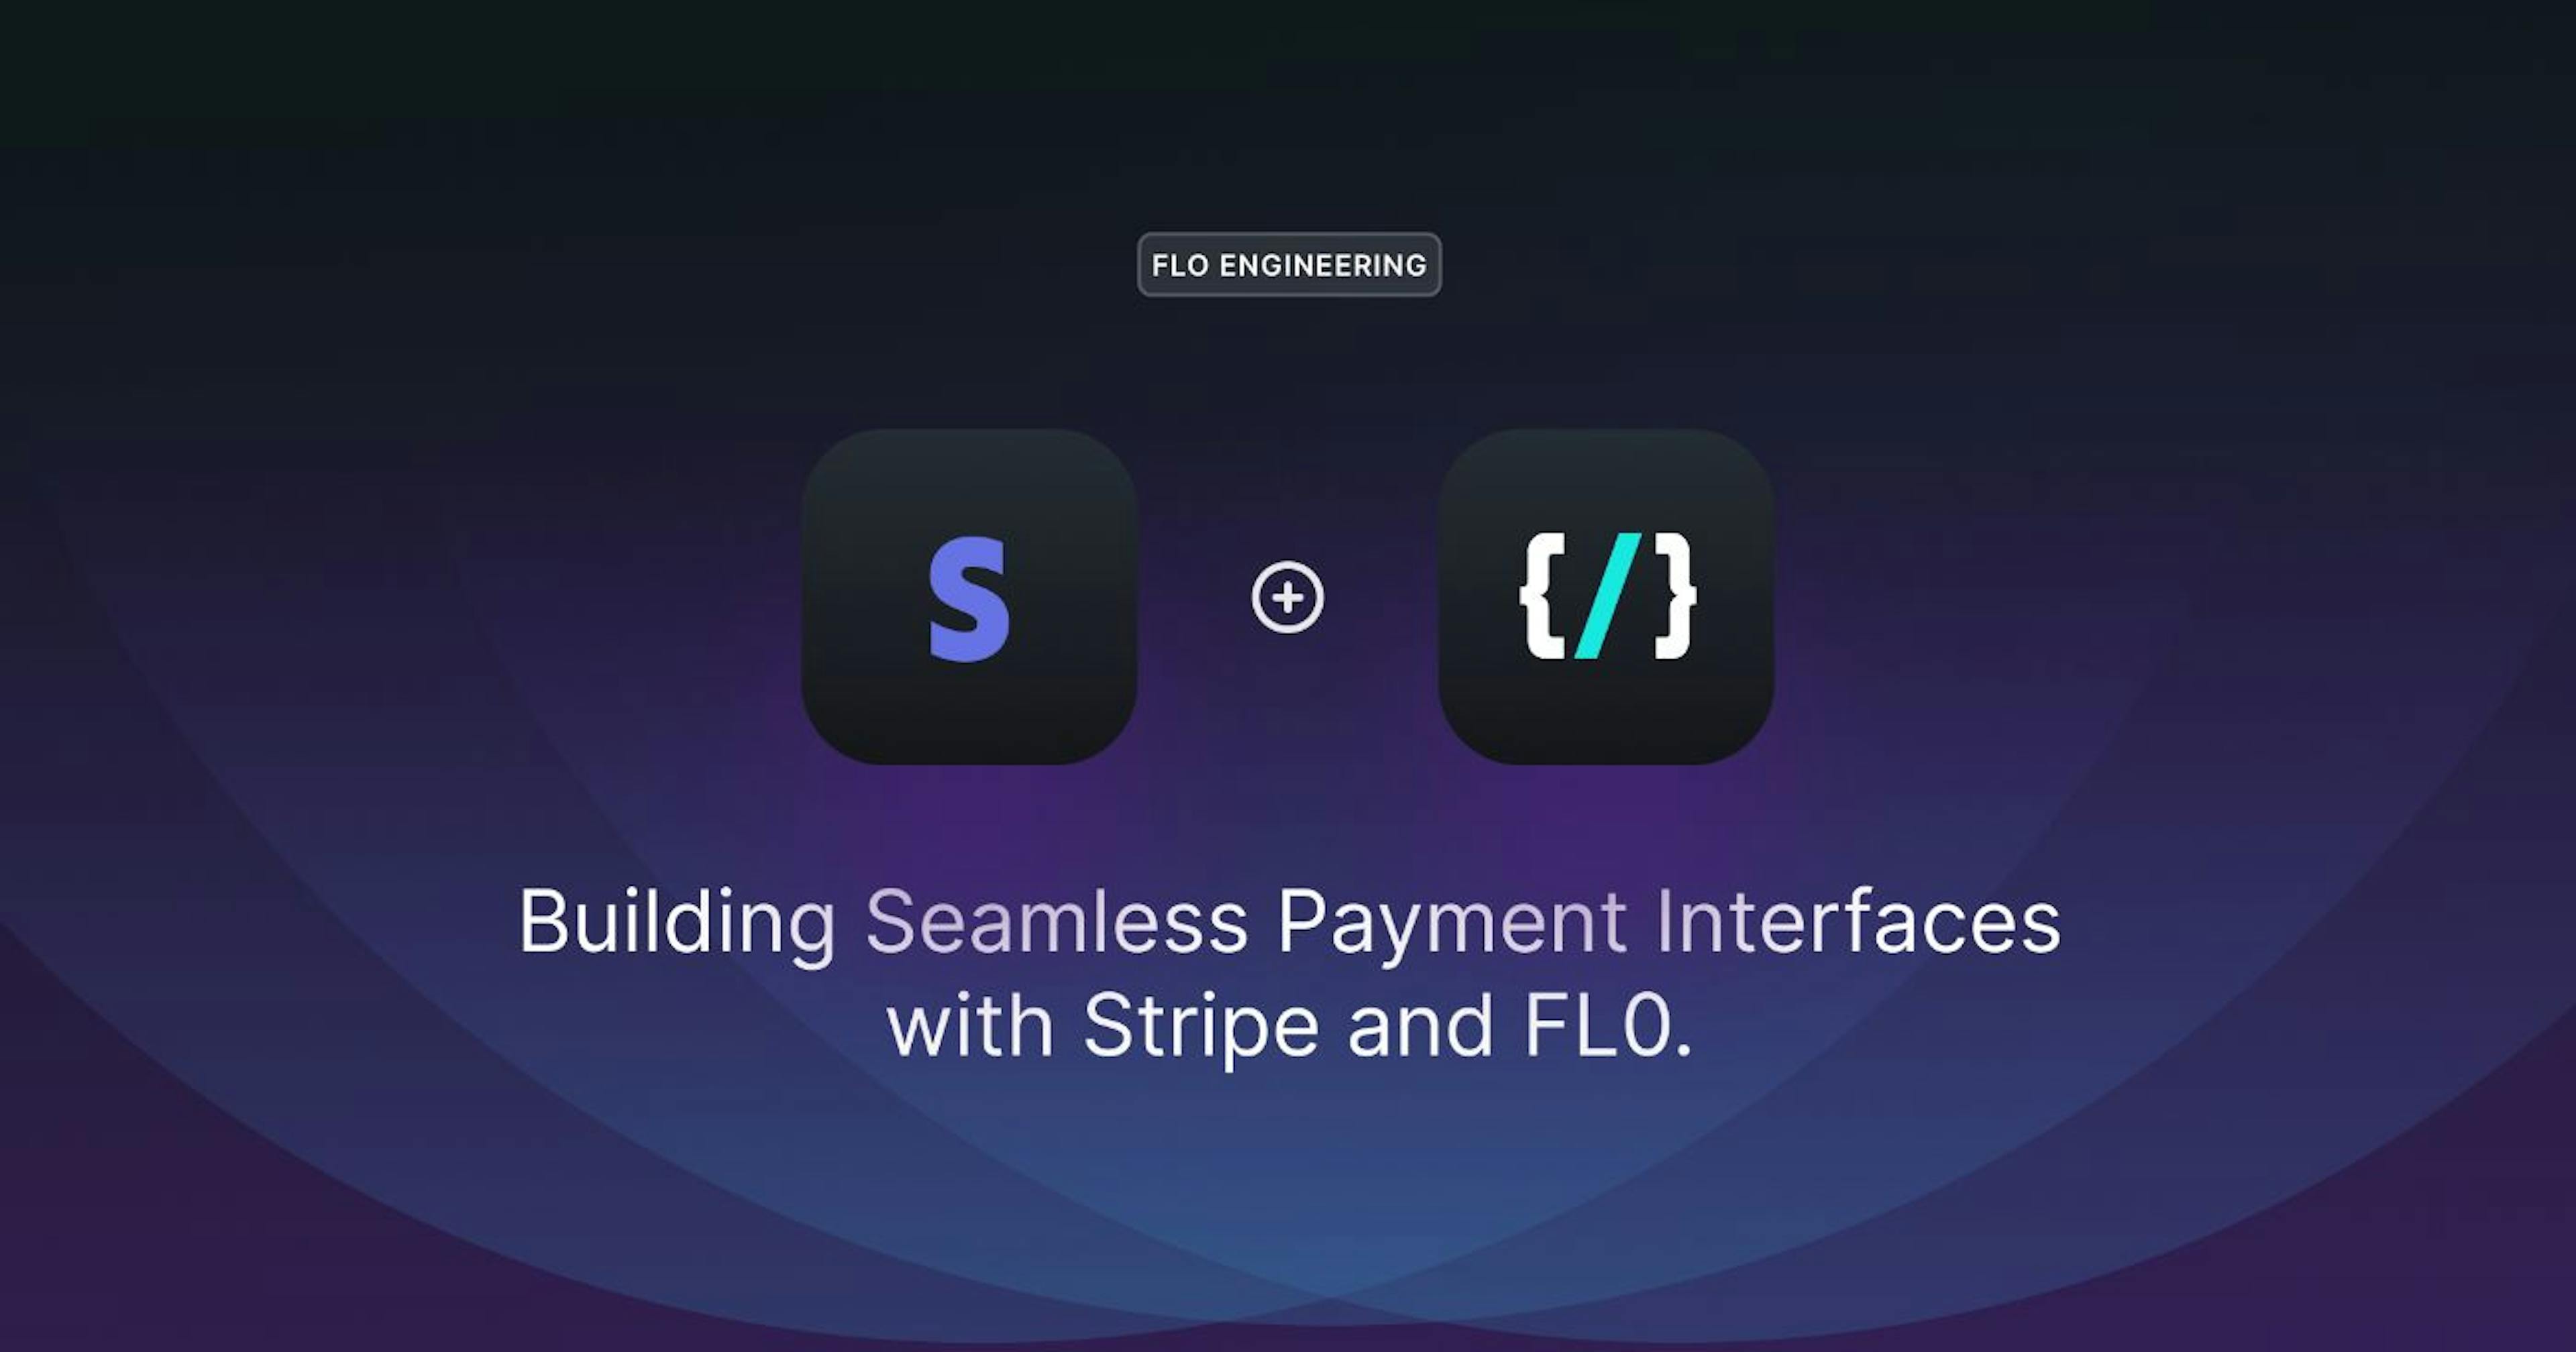 featured image - Creating Seamless Payment Interfaces with Stripe and FL0